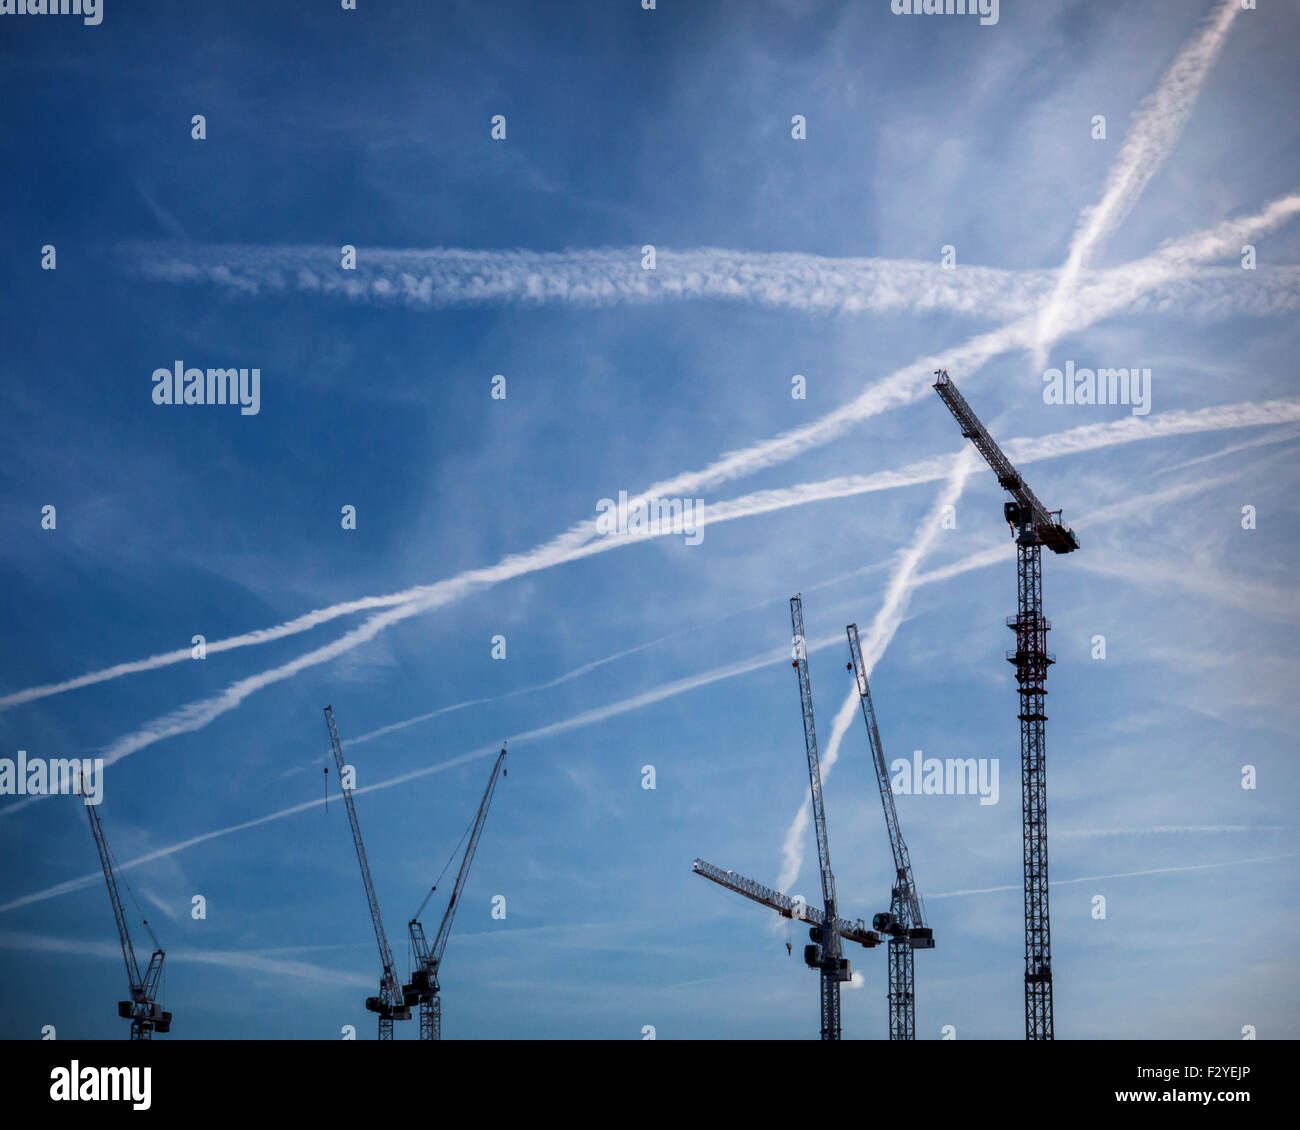 Cranes and planes condensation trails, contrails. urban landscape with dramatic blue sky, Greenwich, London Stock Photo